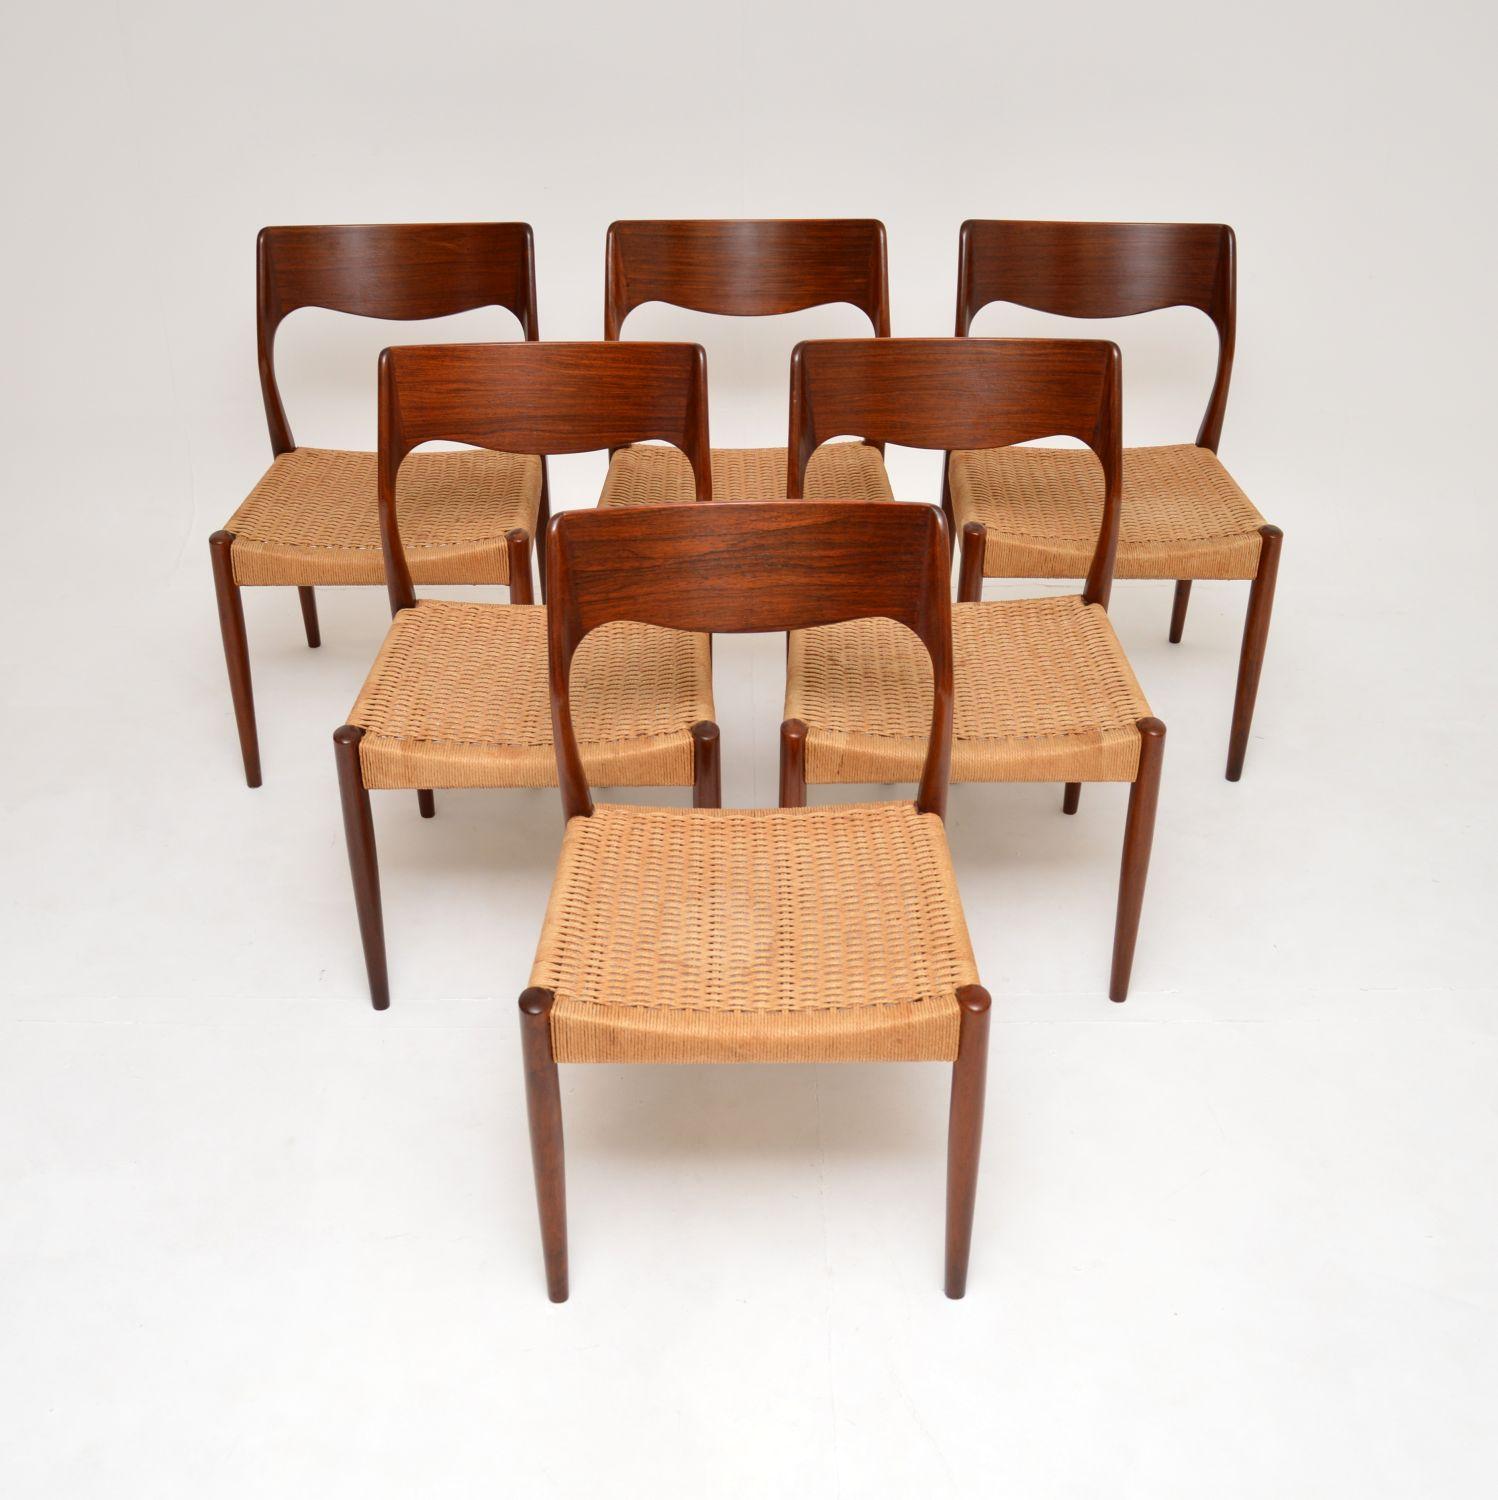 Mid-Century Modern Set of 6 Danish Vintage Dining Chairs by Arne Hovmand-Olsen For Sale